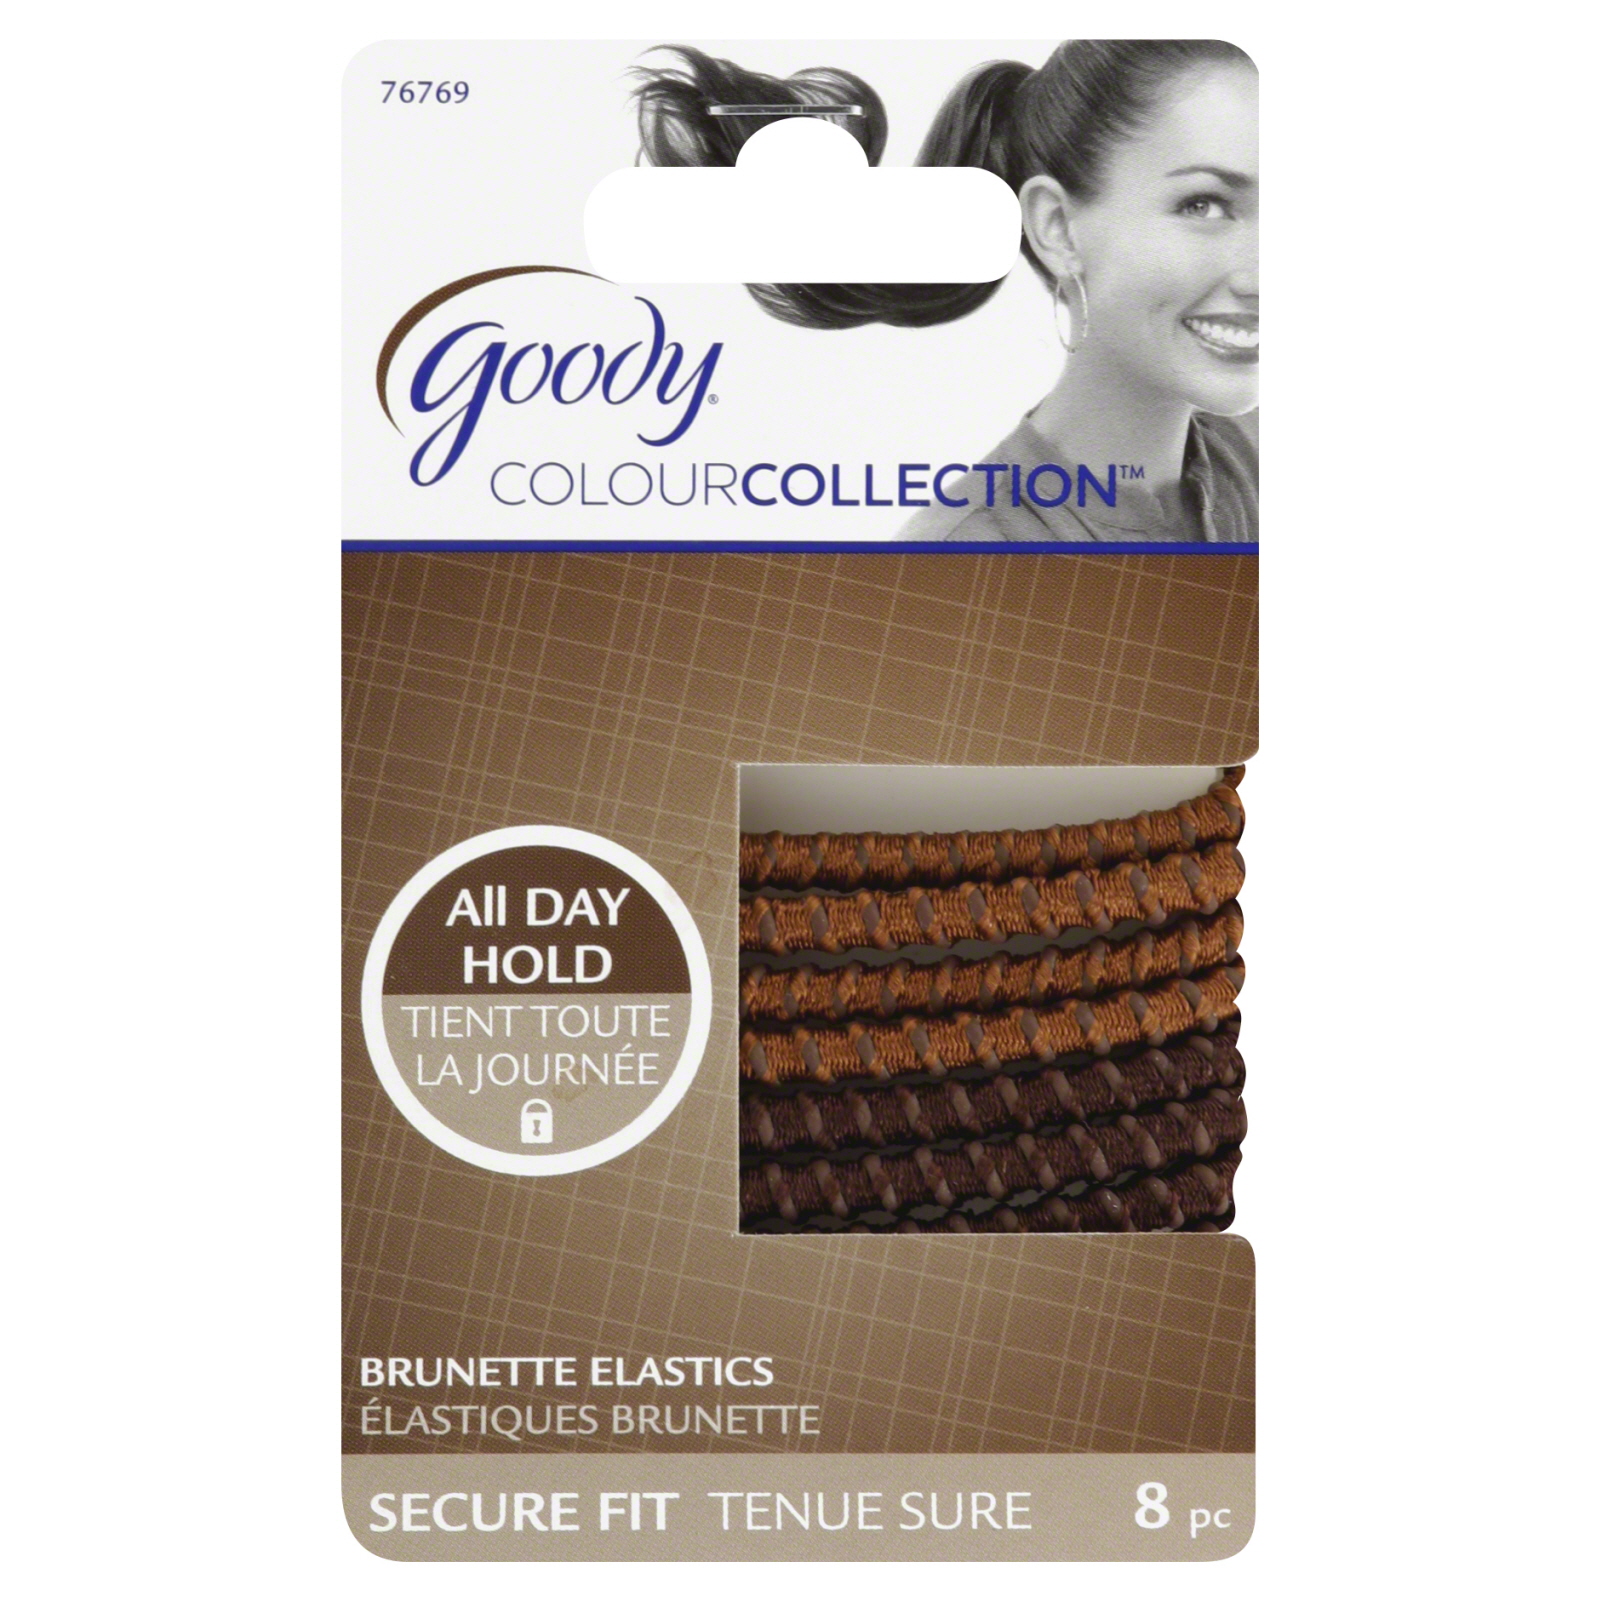 UPC 041457767696 product image for Goody Colour Collection Sparkly Metallic Elastic Stayput, Brunette, 8 CT | upcitemdb.com